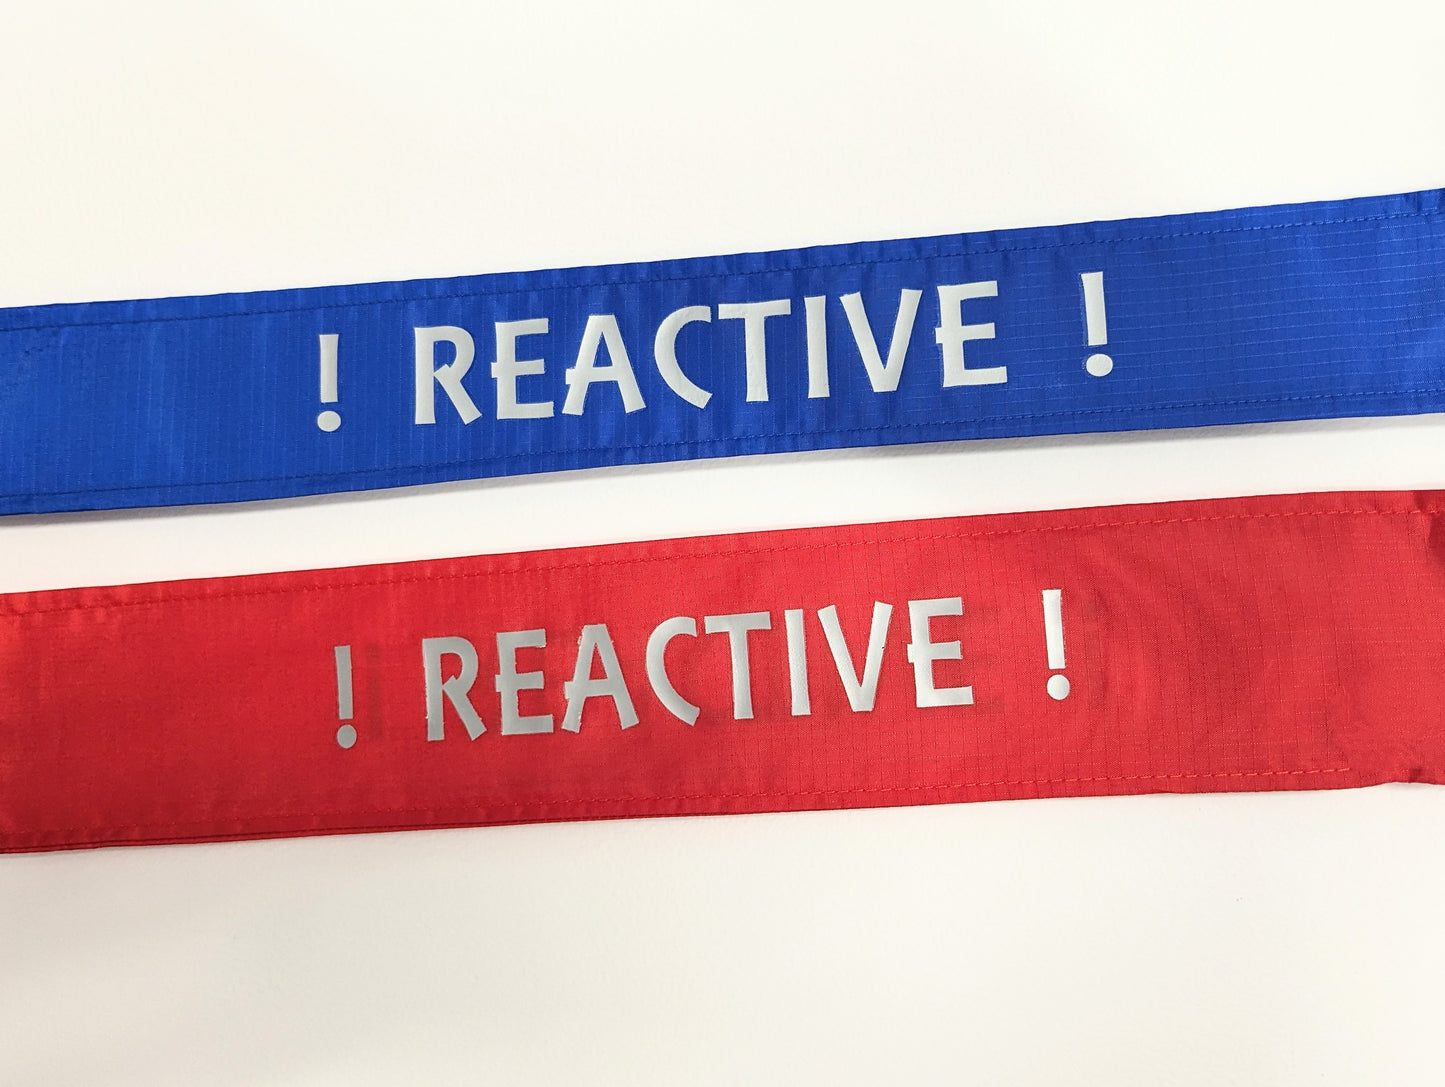 306 "REACTIVE" lead sleeve / cover for dog leash - canine training - puppy socialising - Reactive Dog -various colours available - see pictures and description.